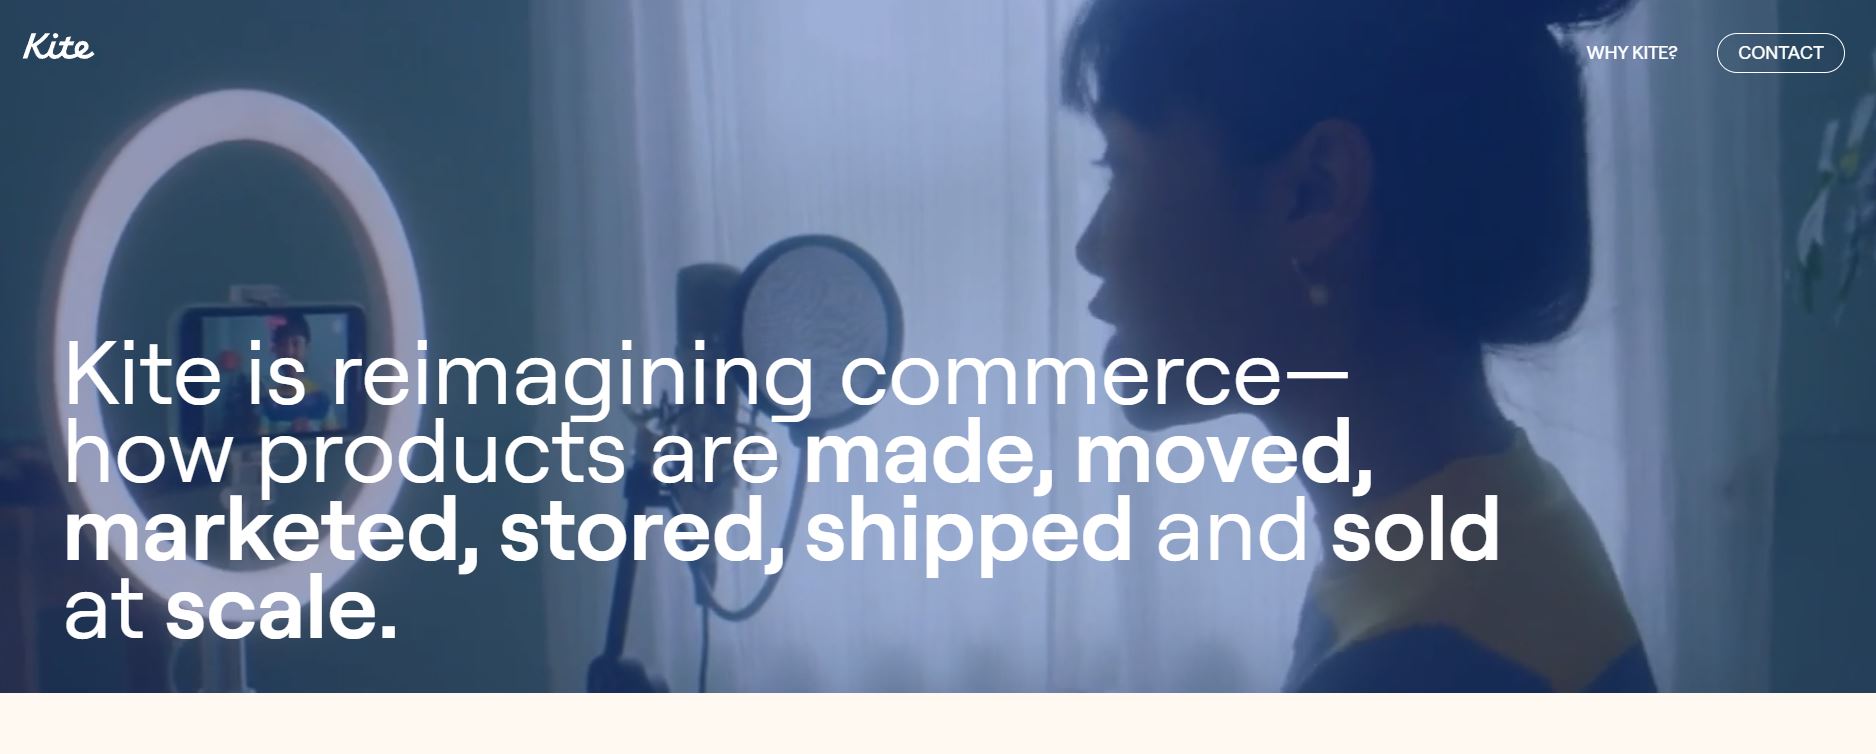 Kite, has raised an astounding $200M to reimagine commerce and revolutionize the way products are made, moved